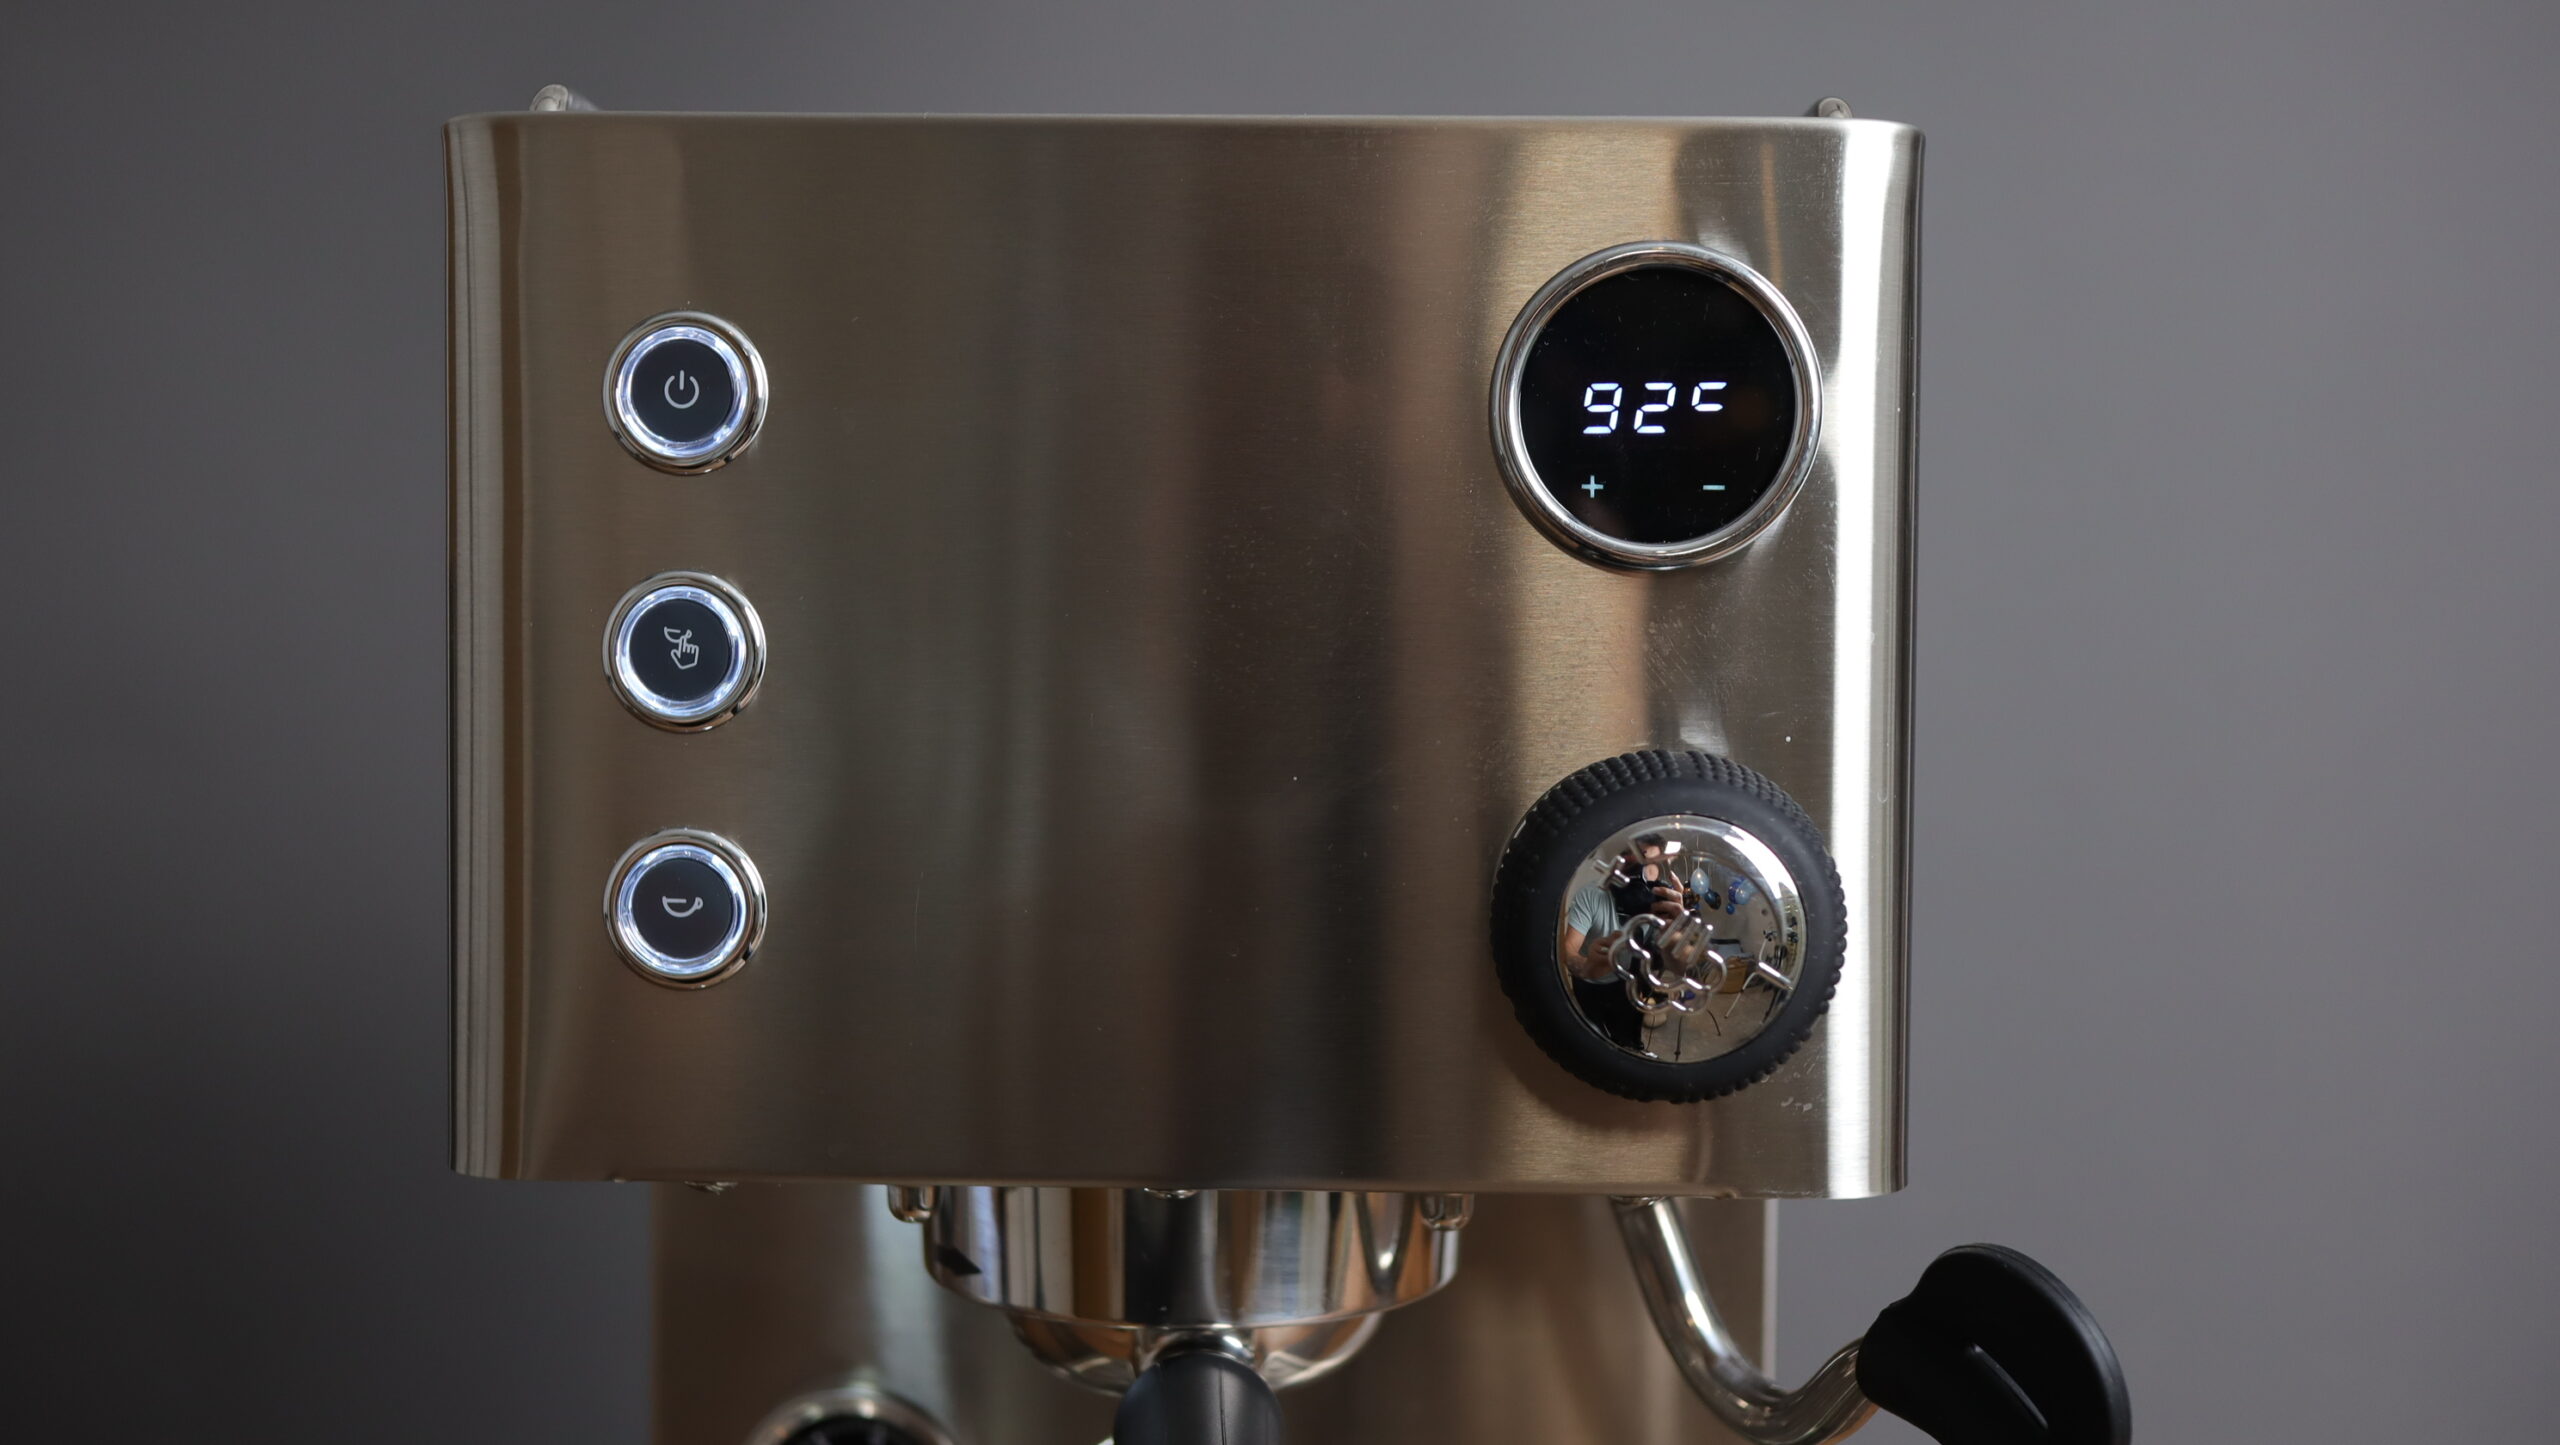 MiiCoffee Apex control panel: illuminated buttons, rotary steam control knob, rounded PID display